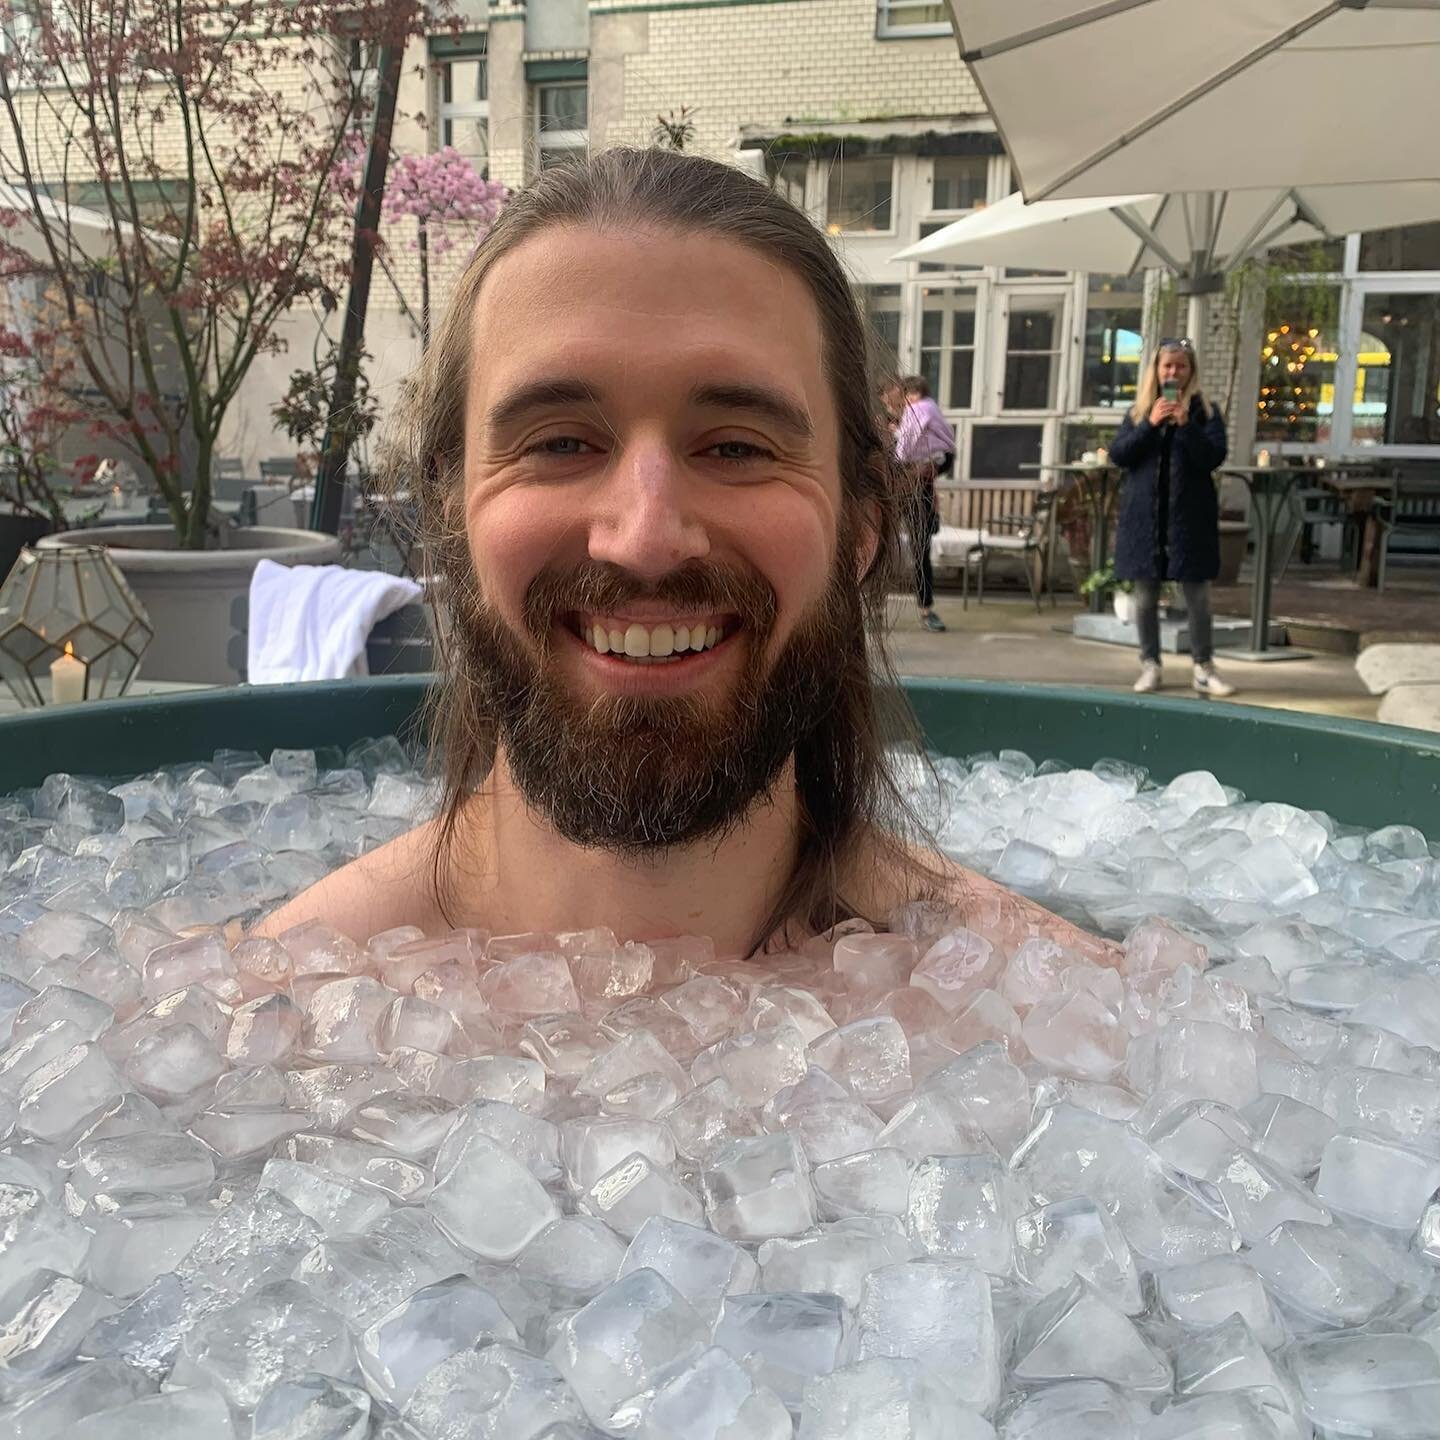 I have been so busy with our retreat that I haven&rsquo;t had a chance to post something I&rsquo;m very proud of: I took a @iceman_hof workshop last weekend with a really great Wim Hof method teacher named Sascha @spirit_of_breath. He expertly shared